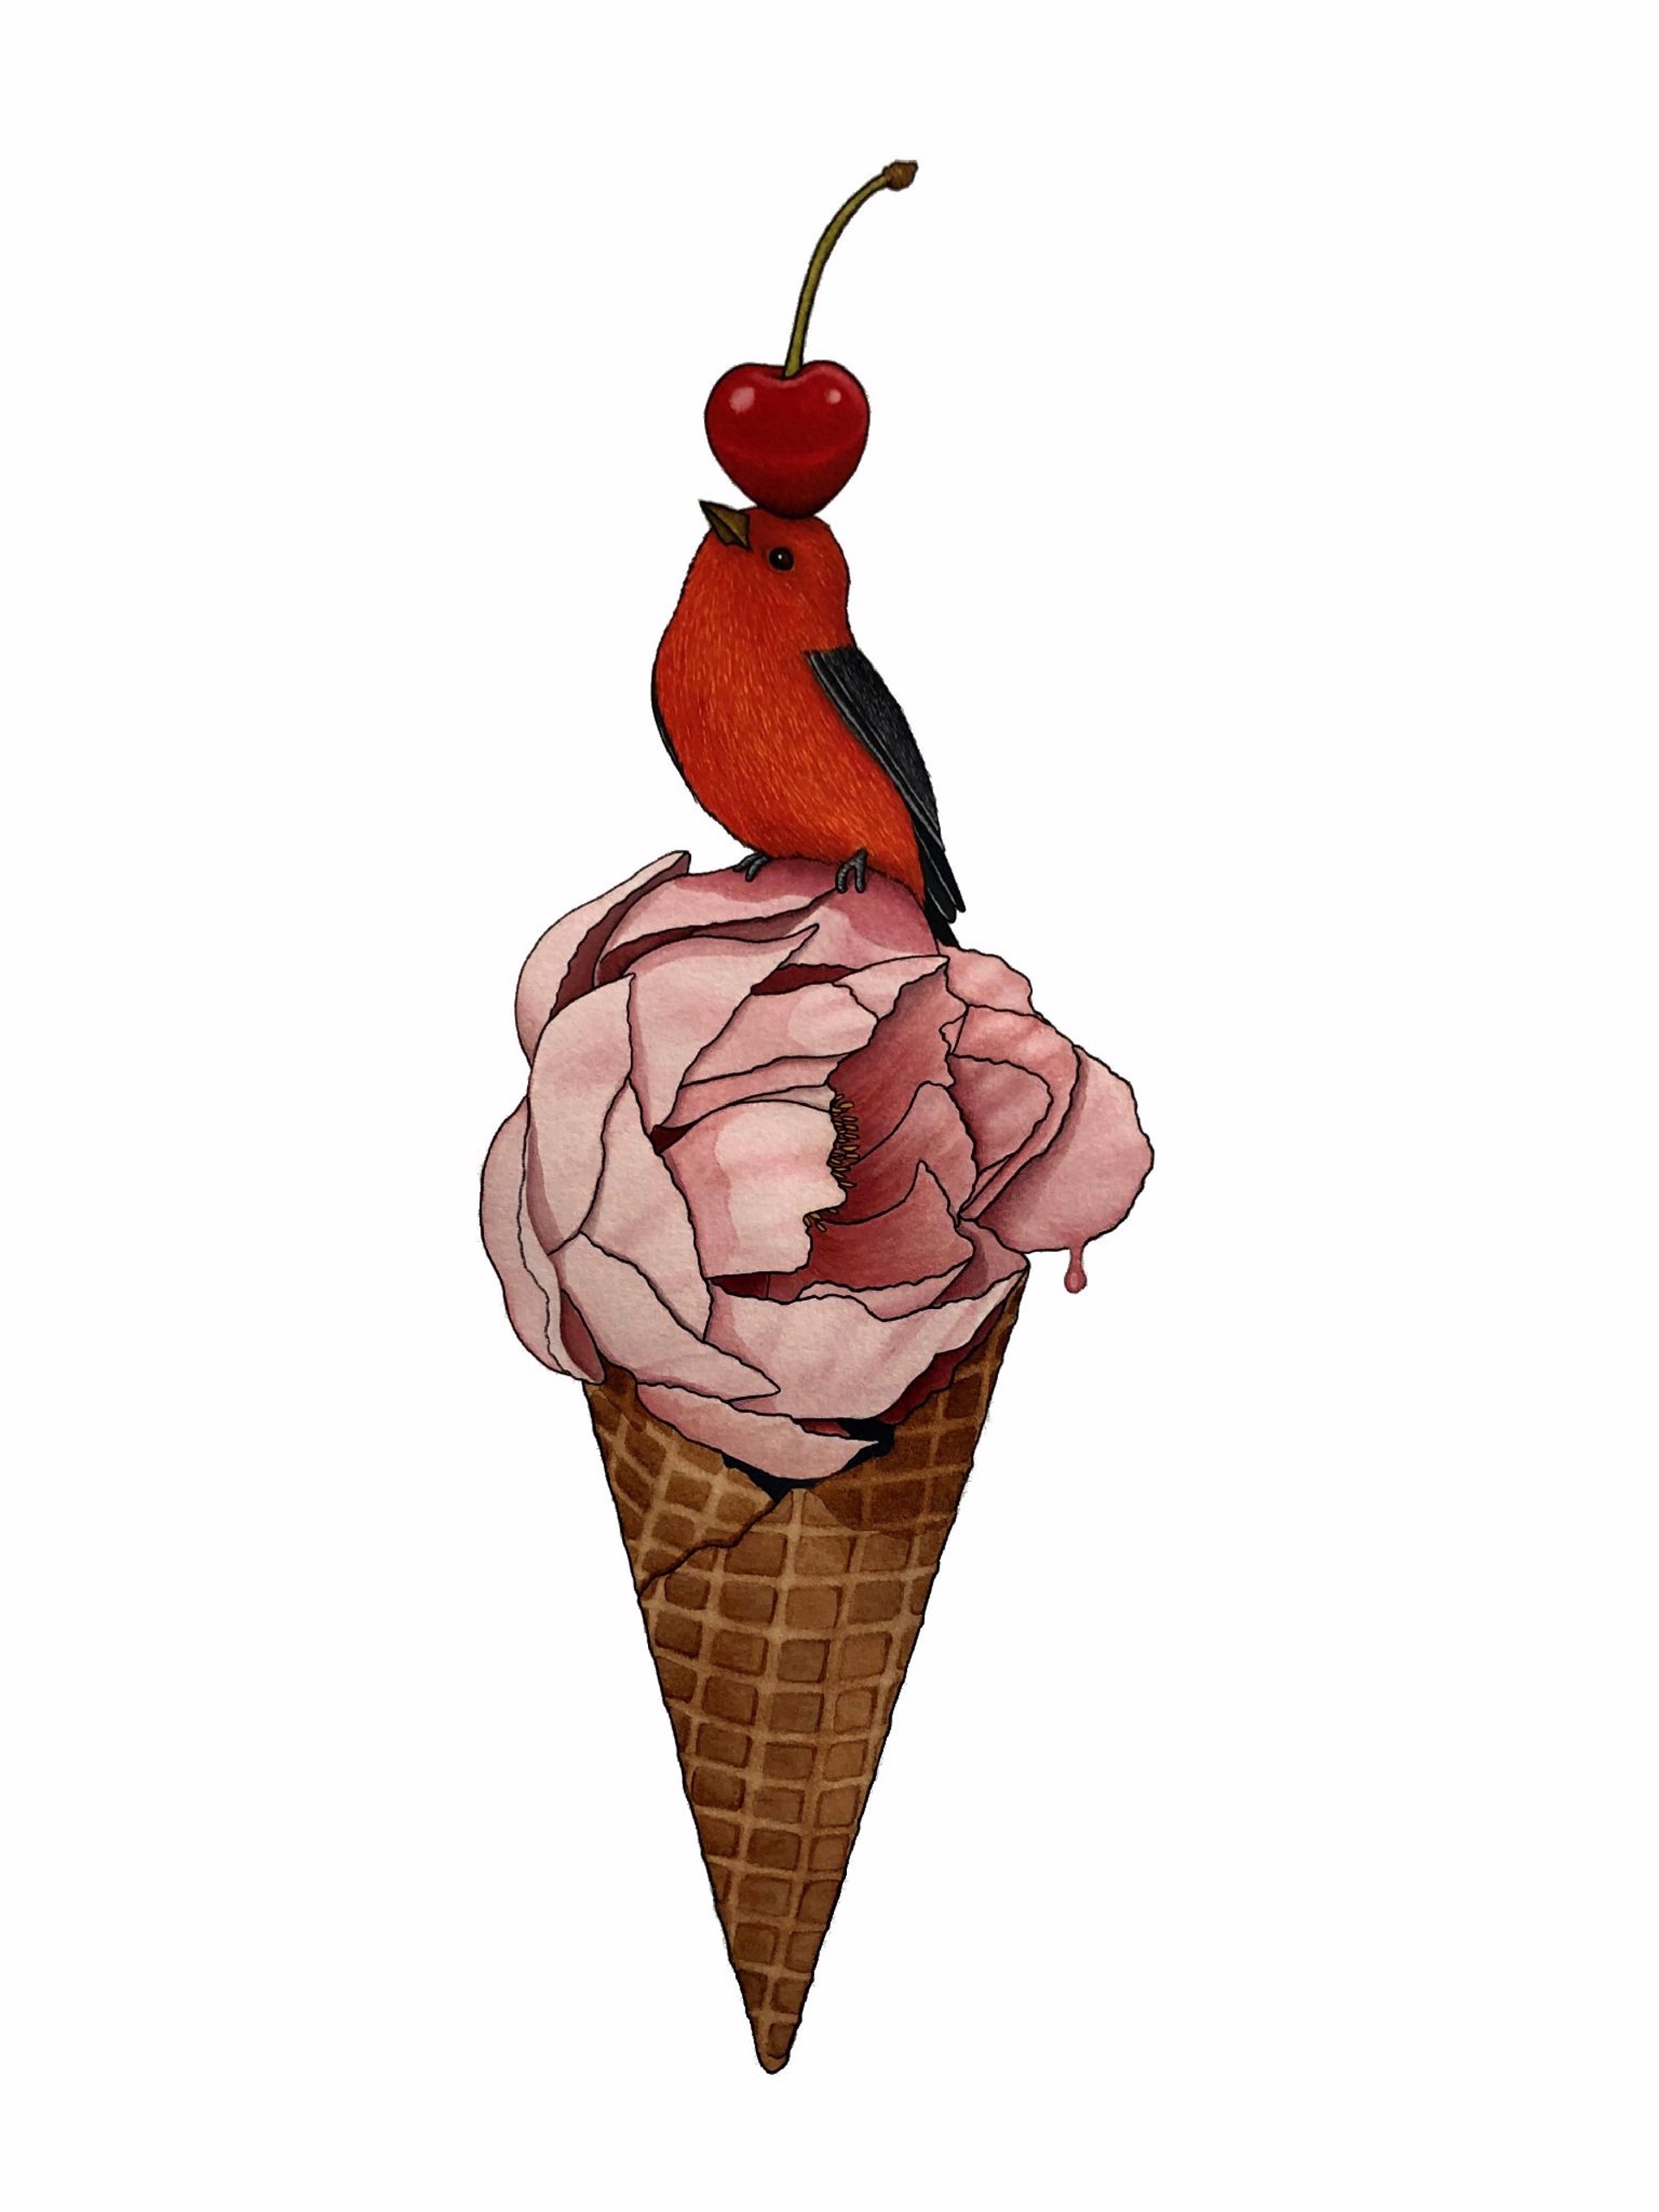 You're the Cherry on Top by Daniel Angeles